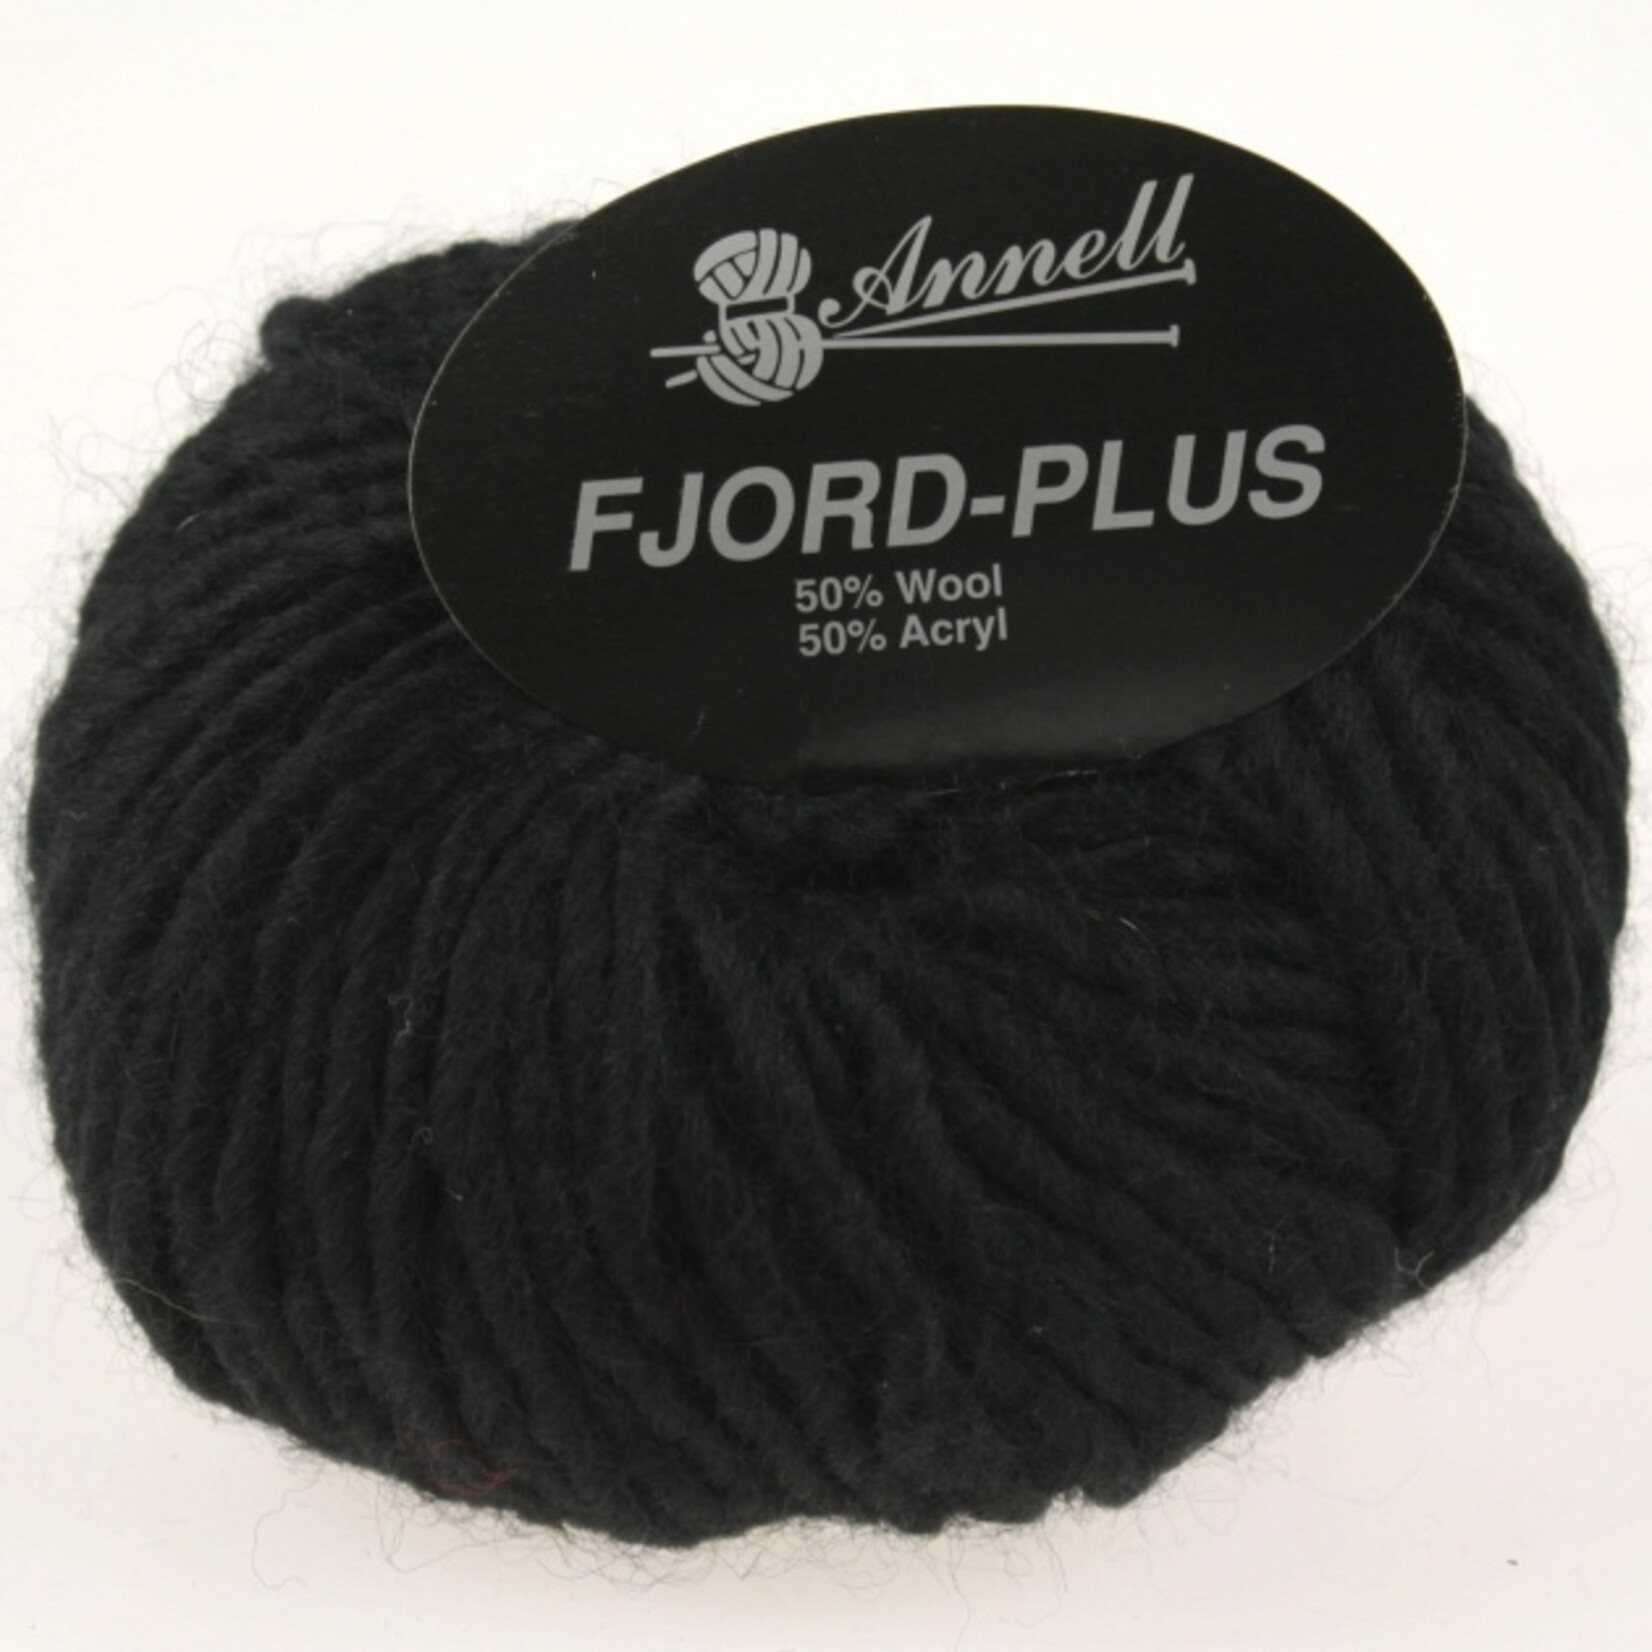 annell fjord plus 0859